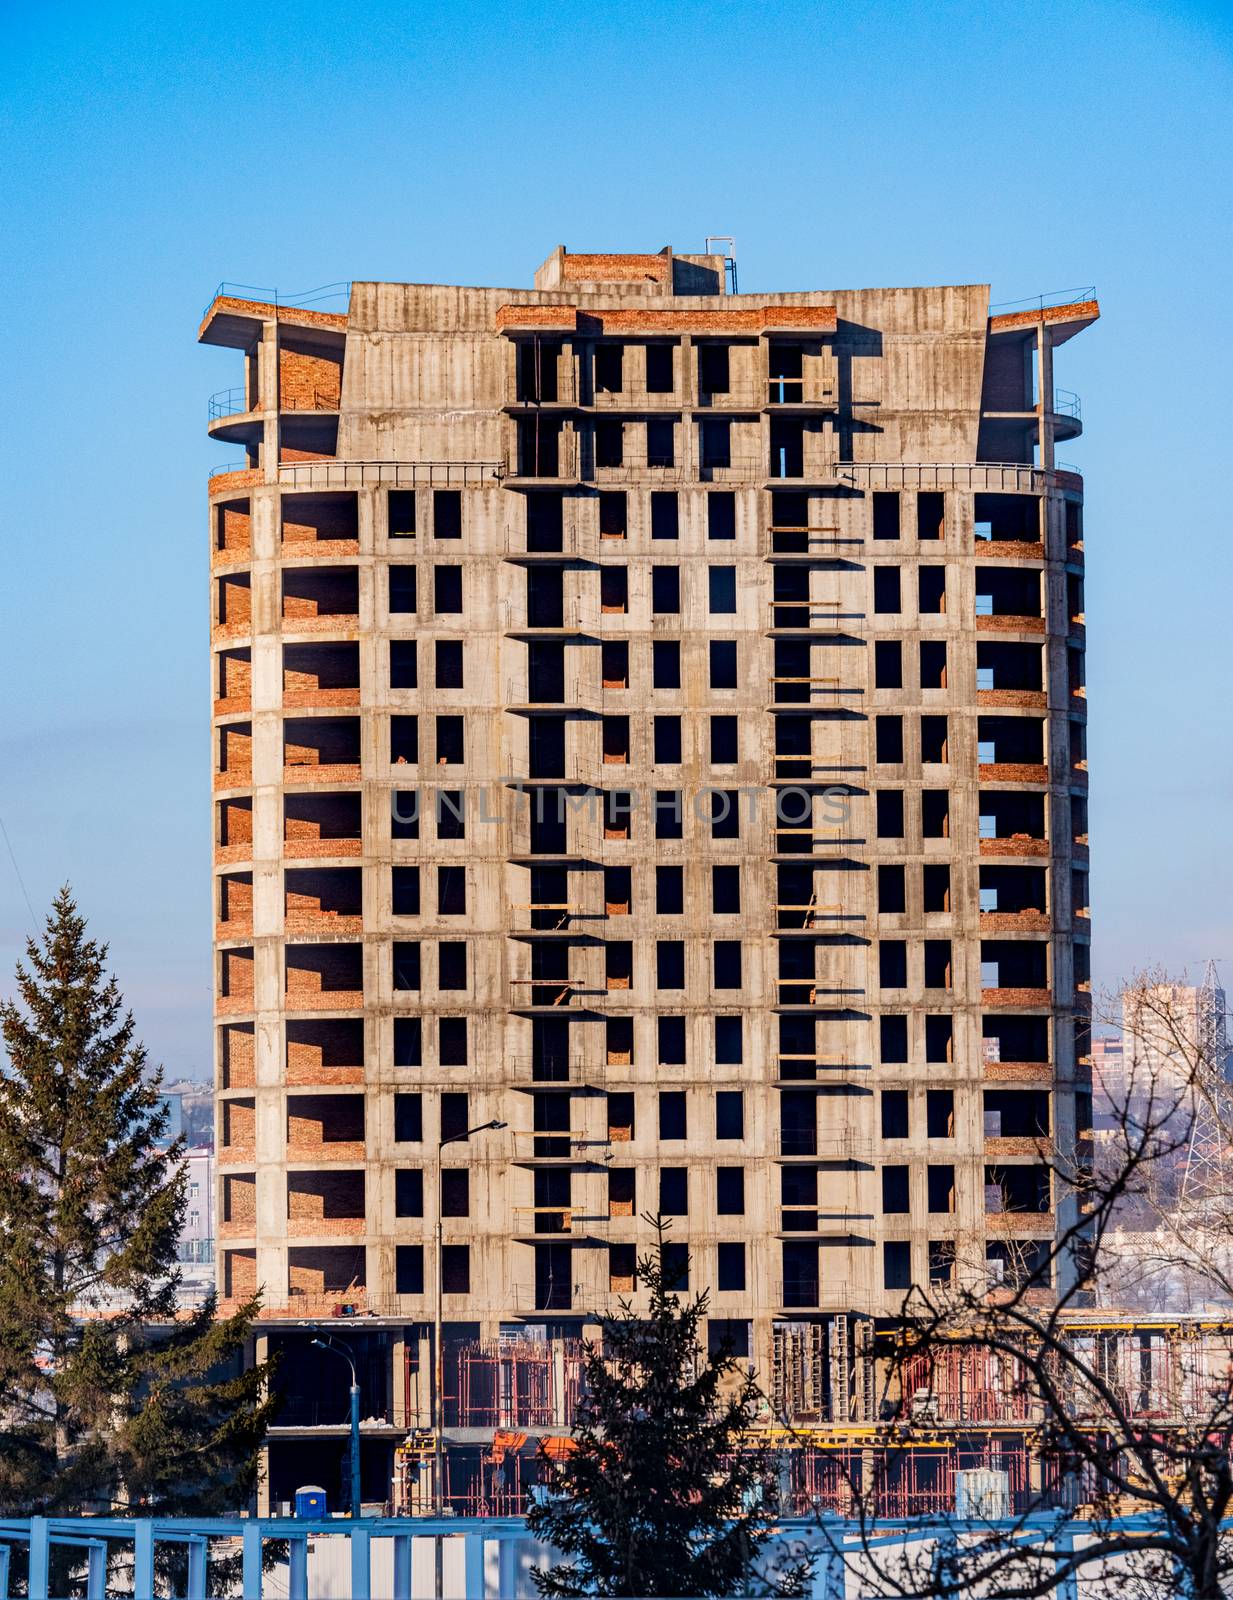 Concrete high-rise building under construction on blue sky background. by Imagenet